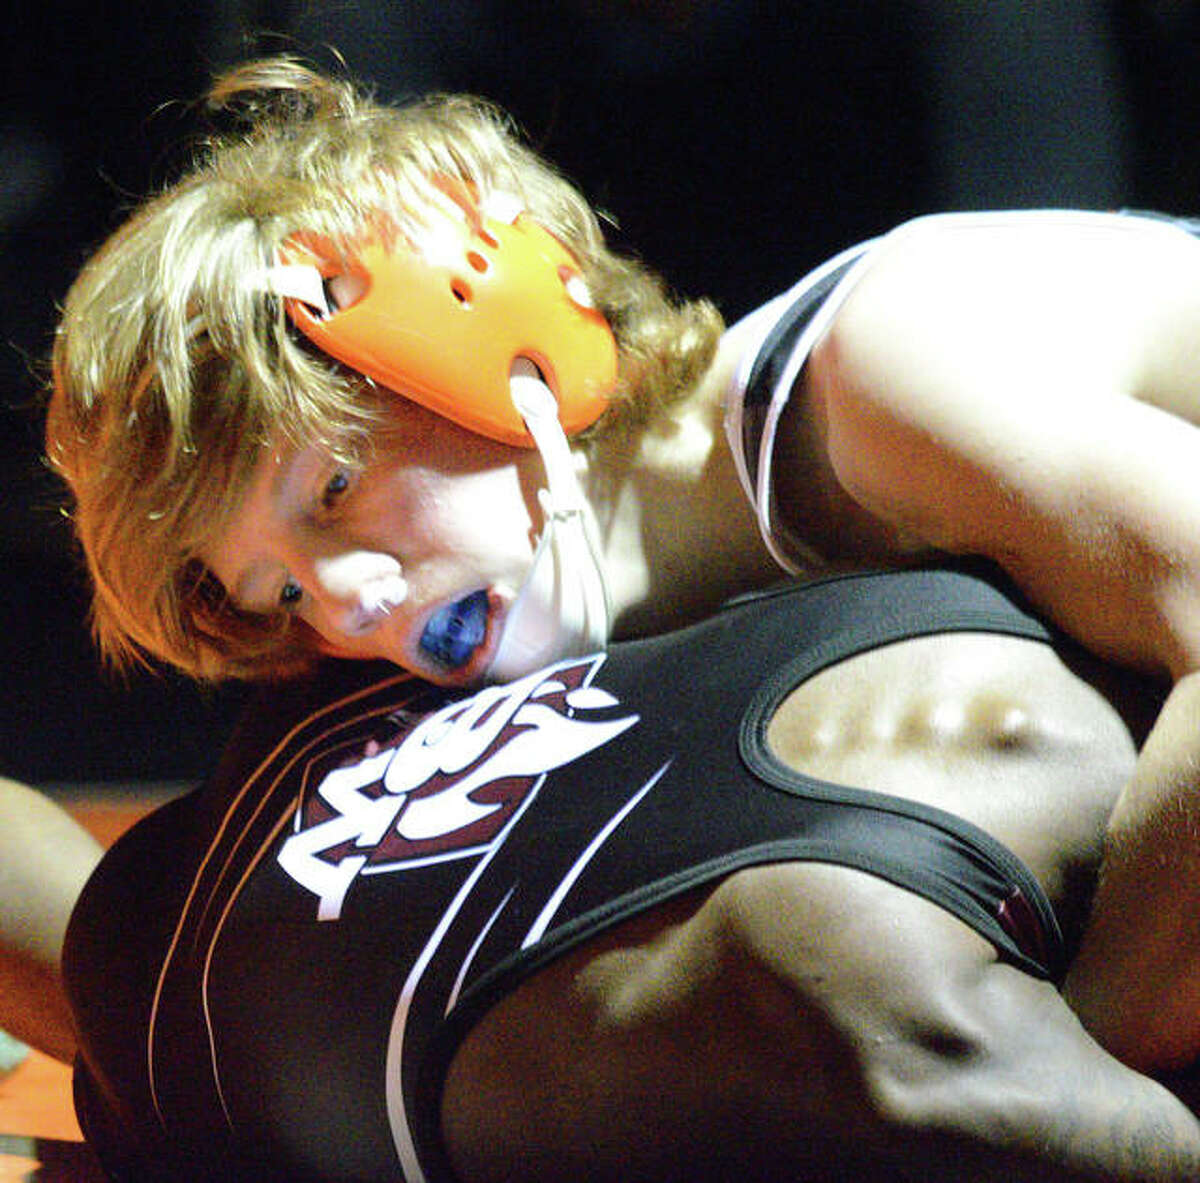 Edwardsville’s Jack Summers, top, tries to get a grip on Belleville West’s Justin Harris at 106 pounds during Thursday’s Southwestern Conference dual match at Jon Davis Wrestling Center.